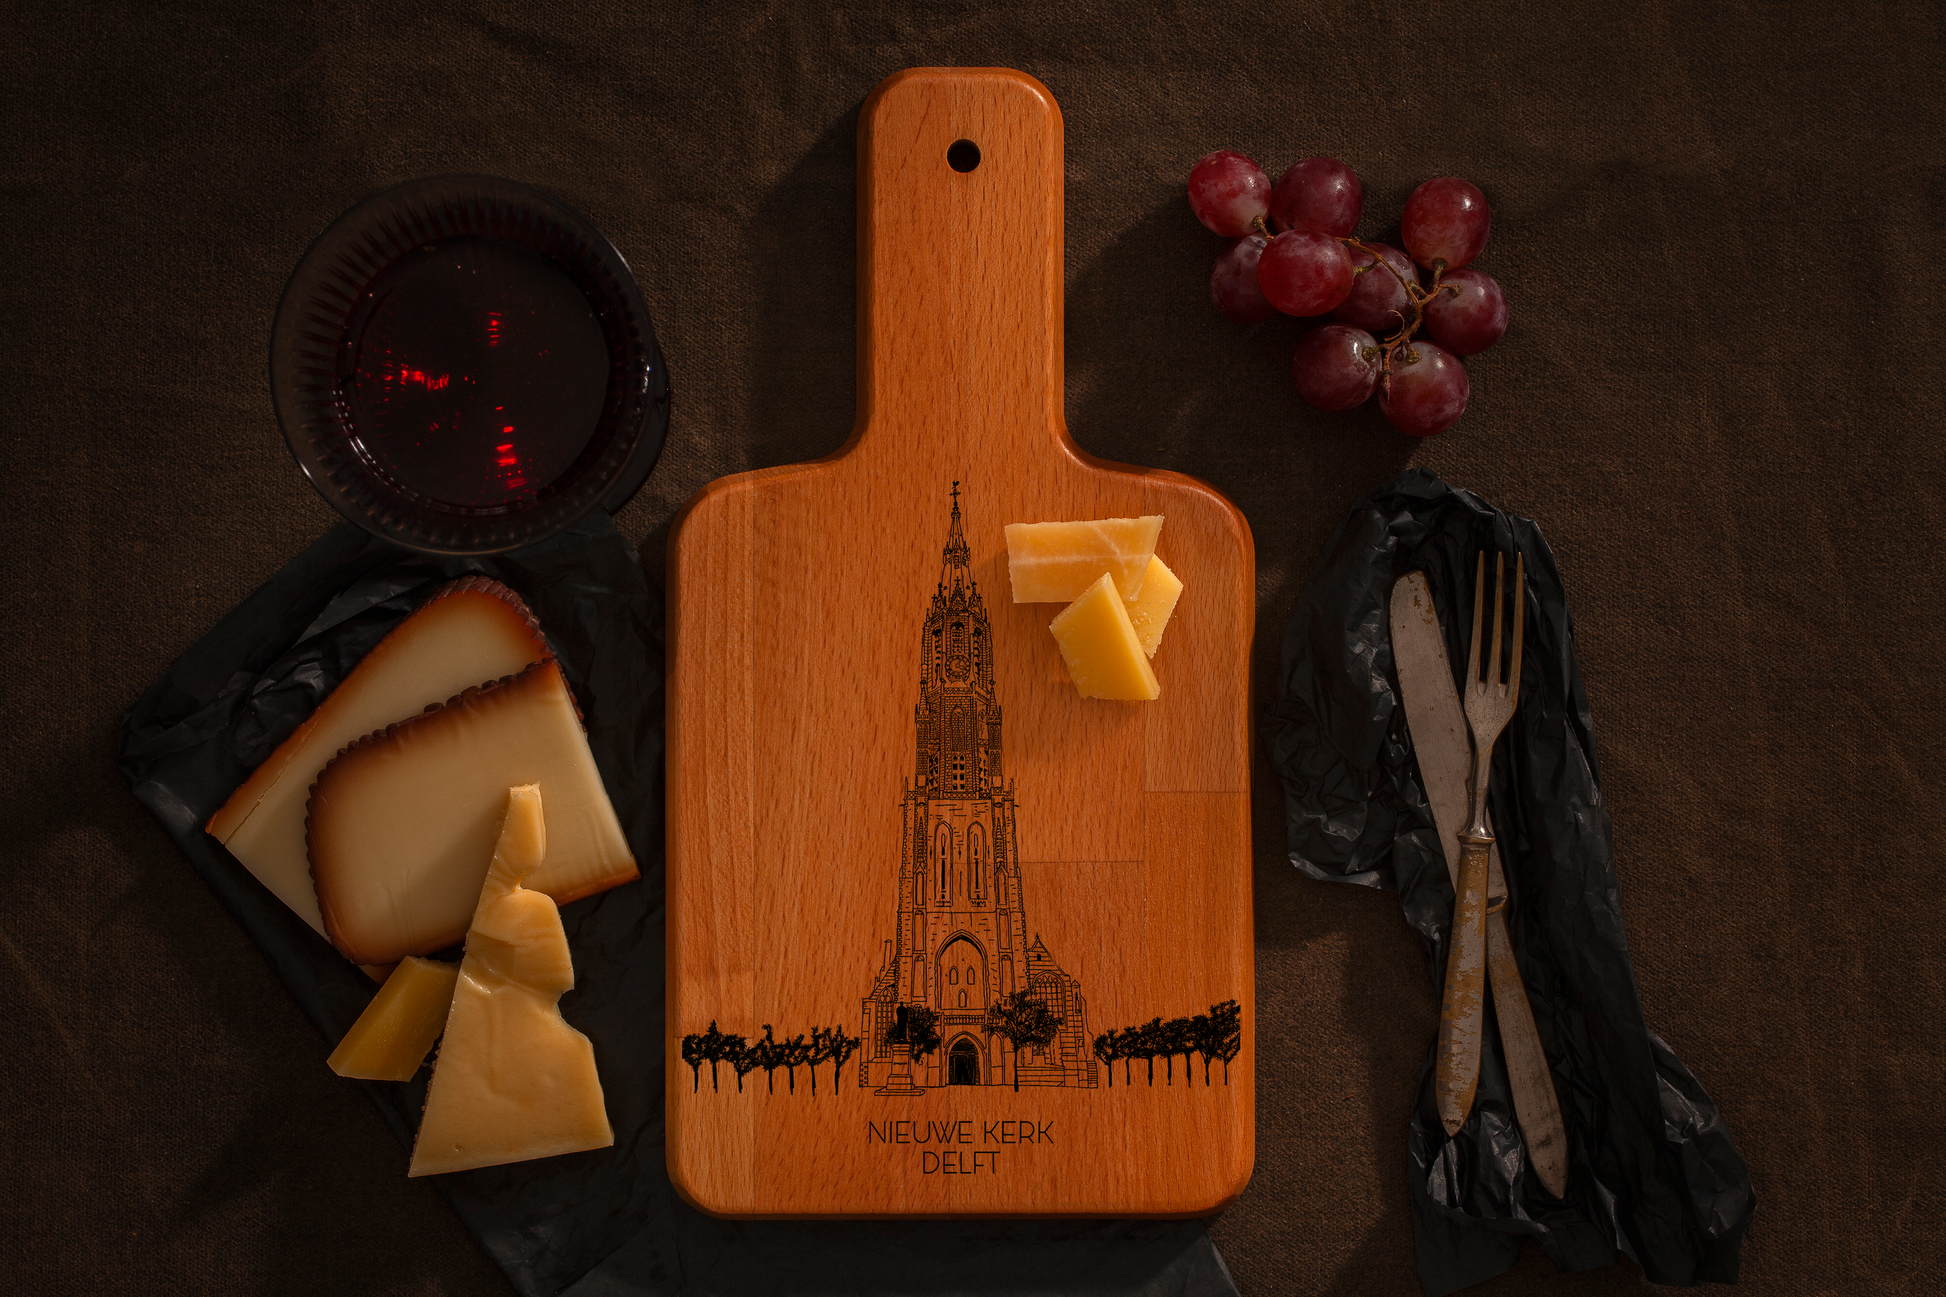 Delft, Nieuwe Kerk, cheese board, with cheese